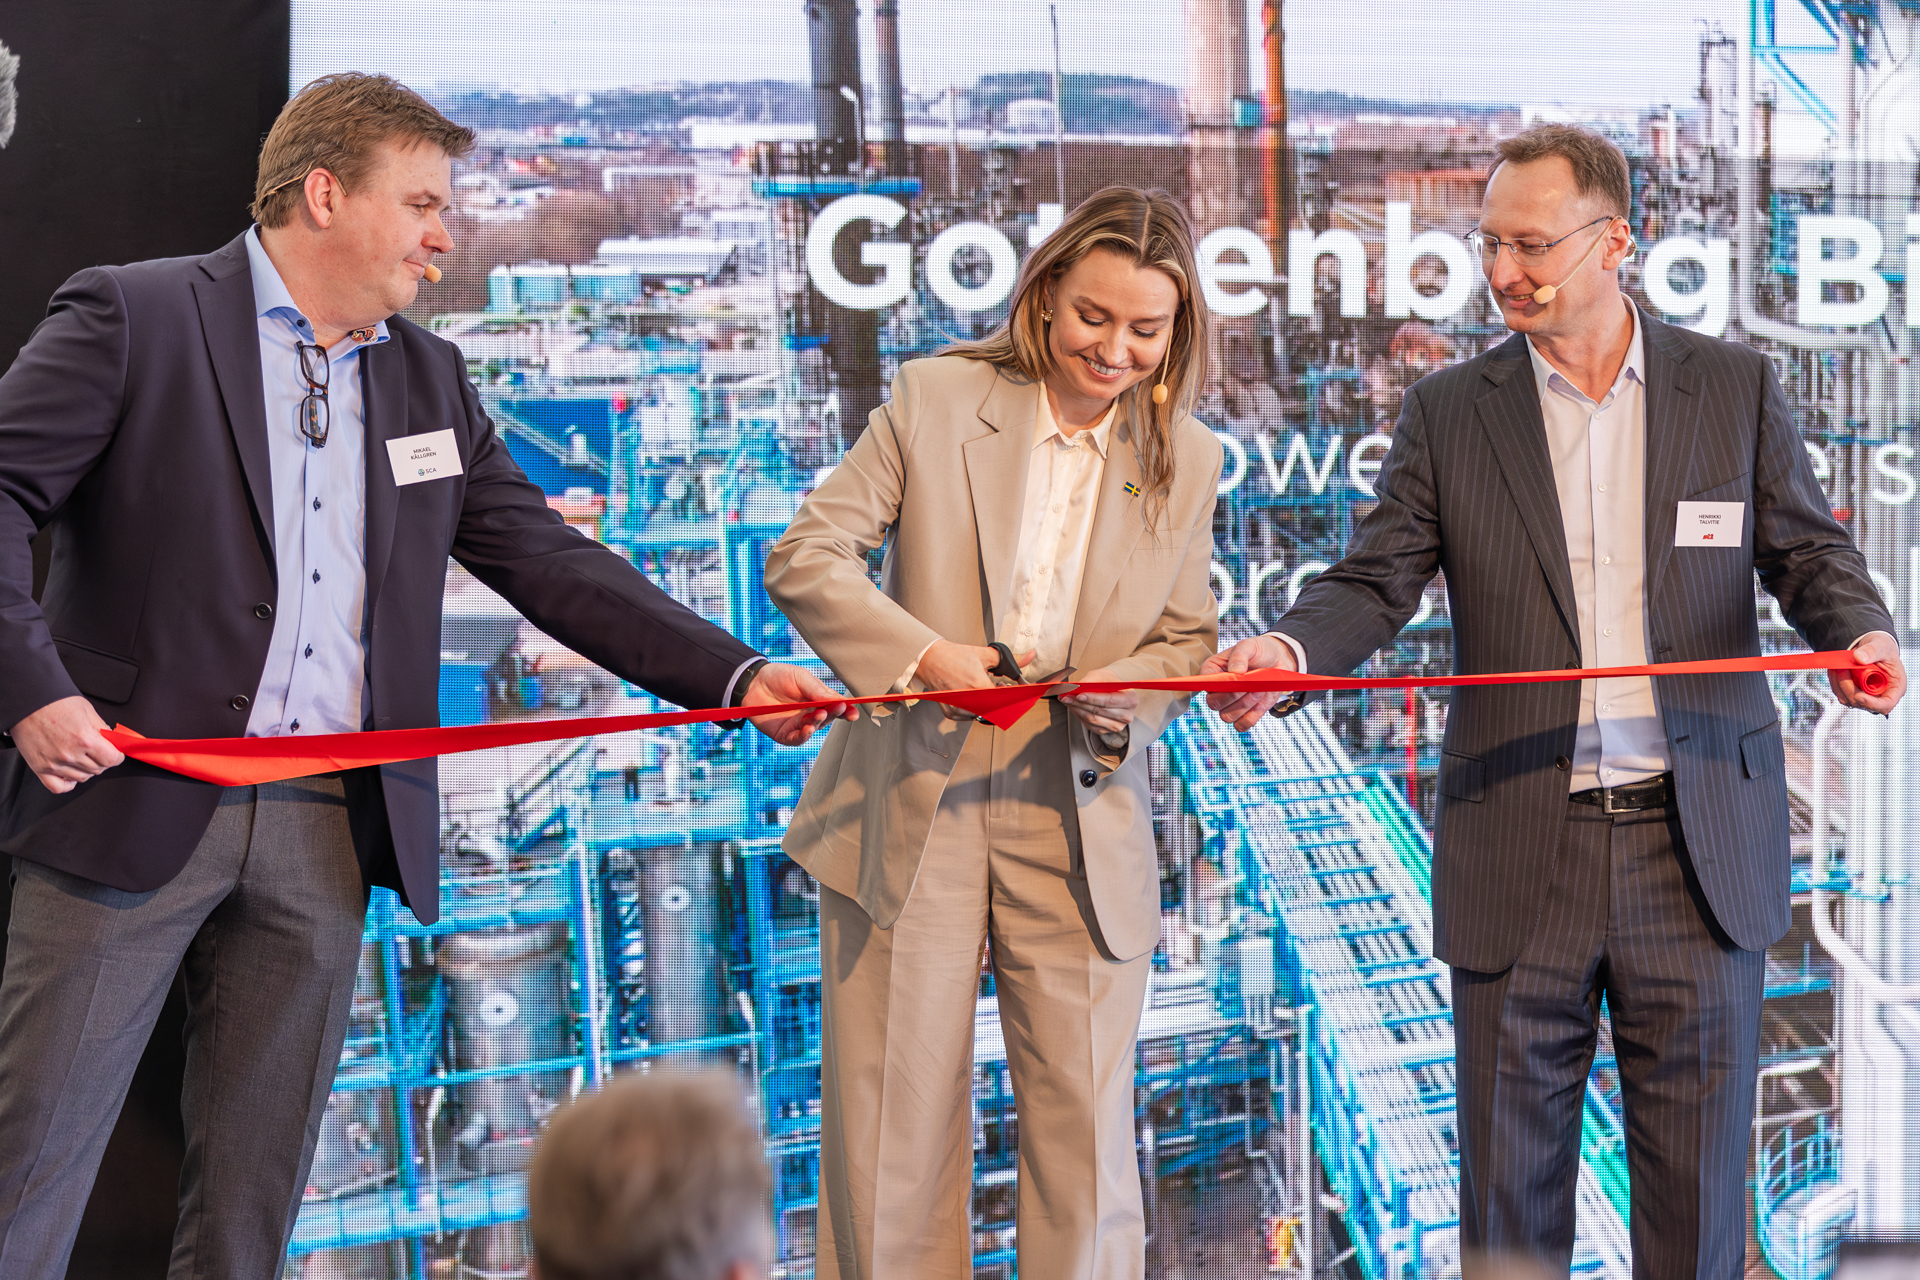 Energy, Business and Industry Minister Ebba Busch, cut the rope on the opening